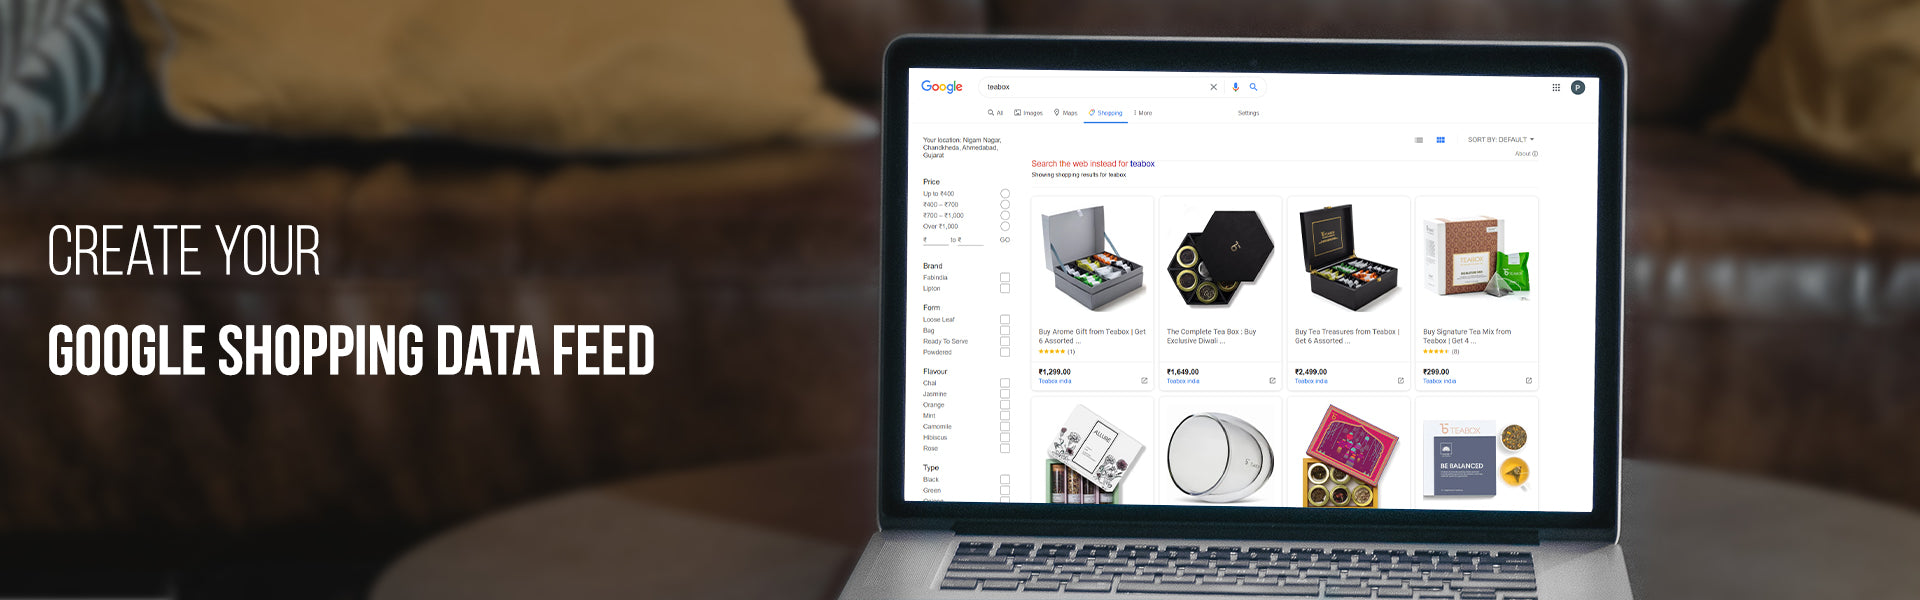 Create your Google Shopping Data Feed